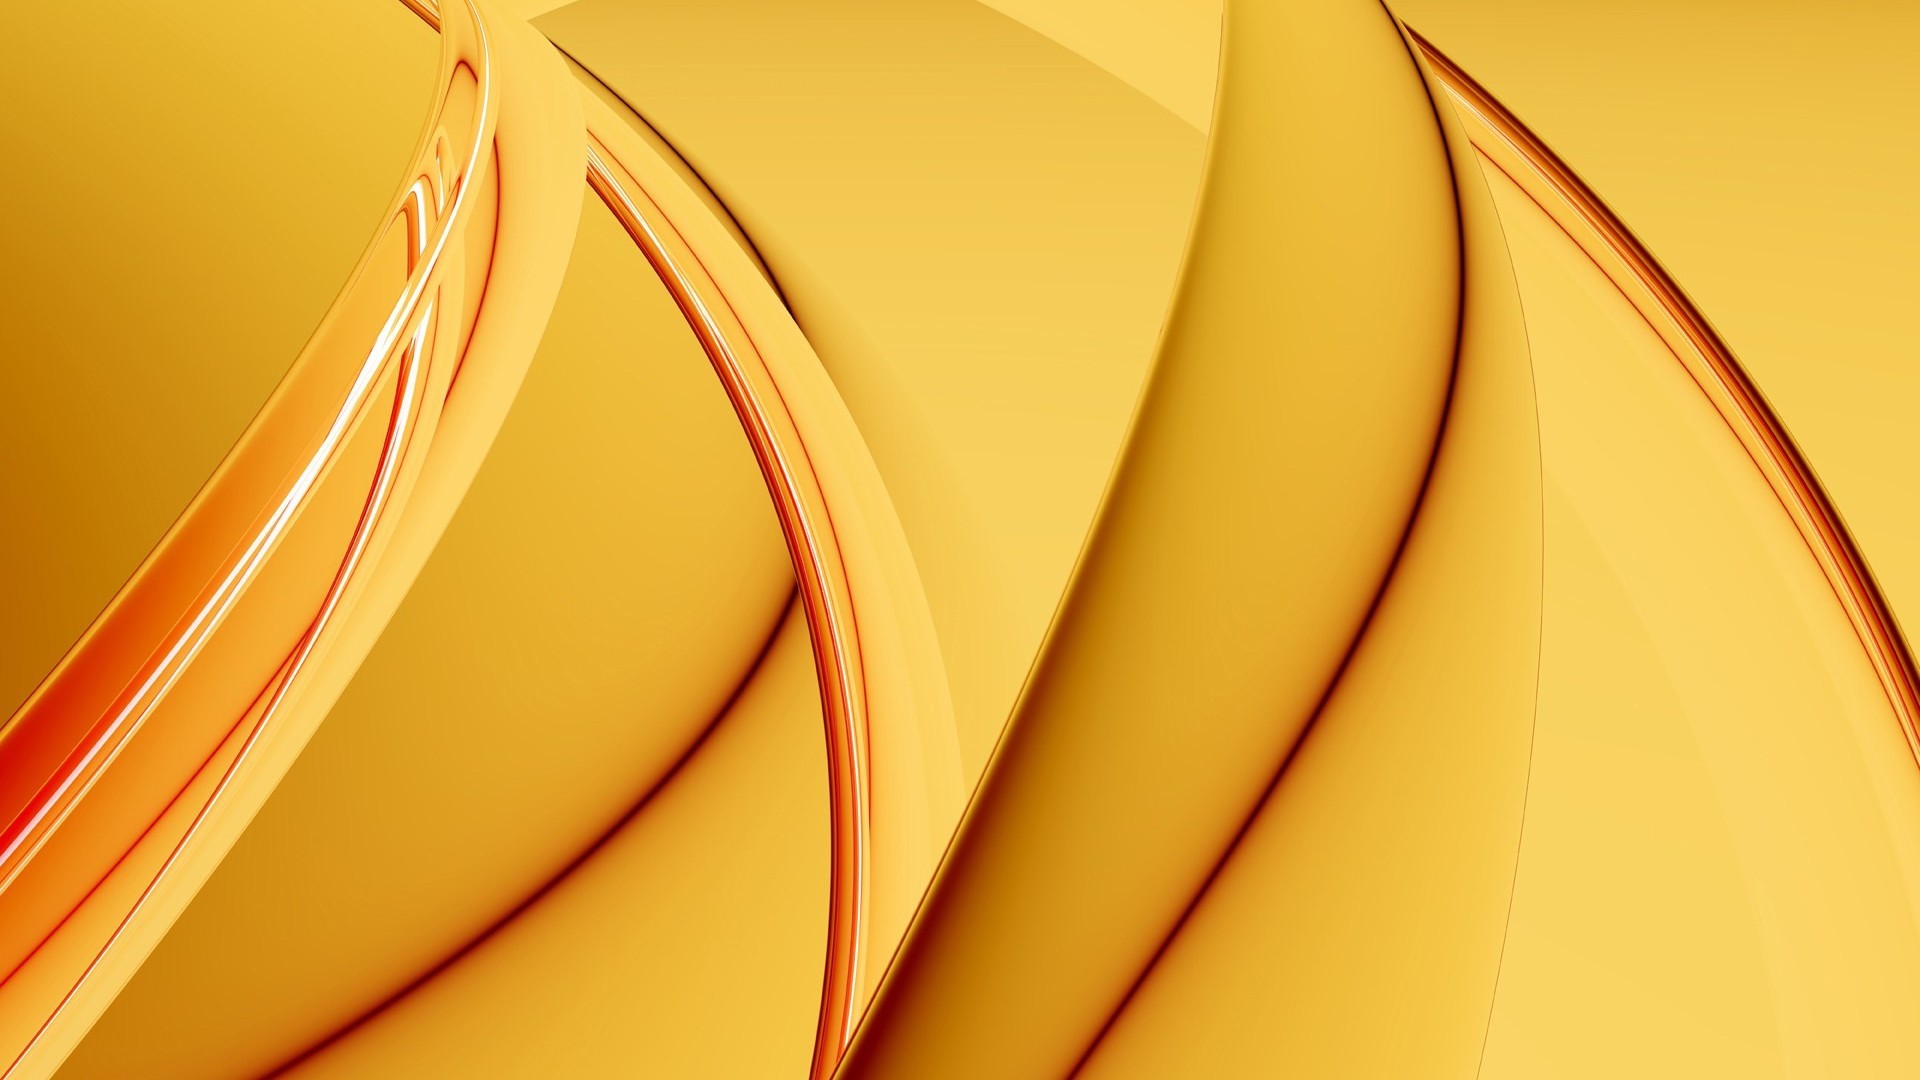 1920x1080 Widescreen 16:10 1440x9001680x10501920x1200. Download Abstract colorful  design Golden color Wallpaper ...